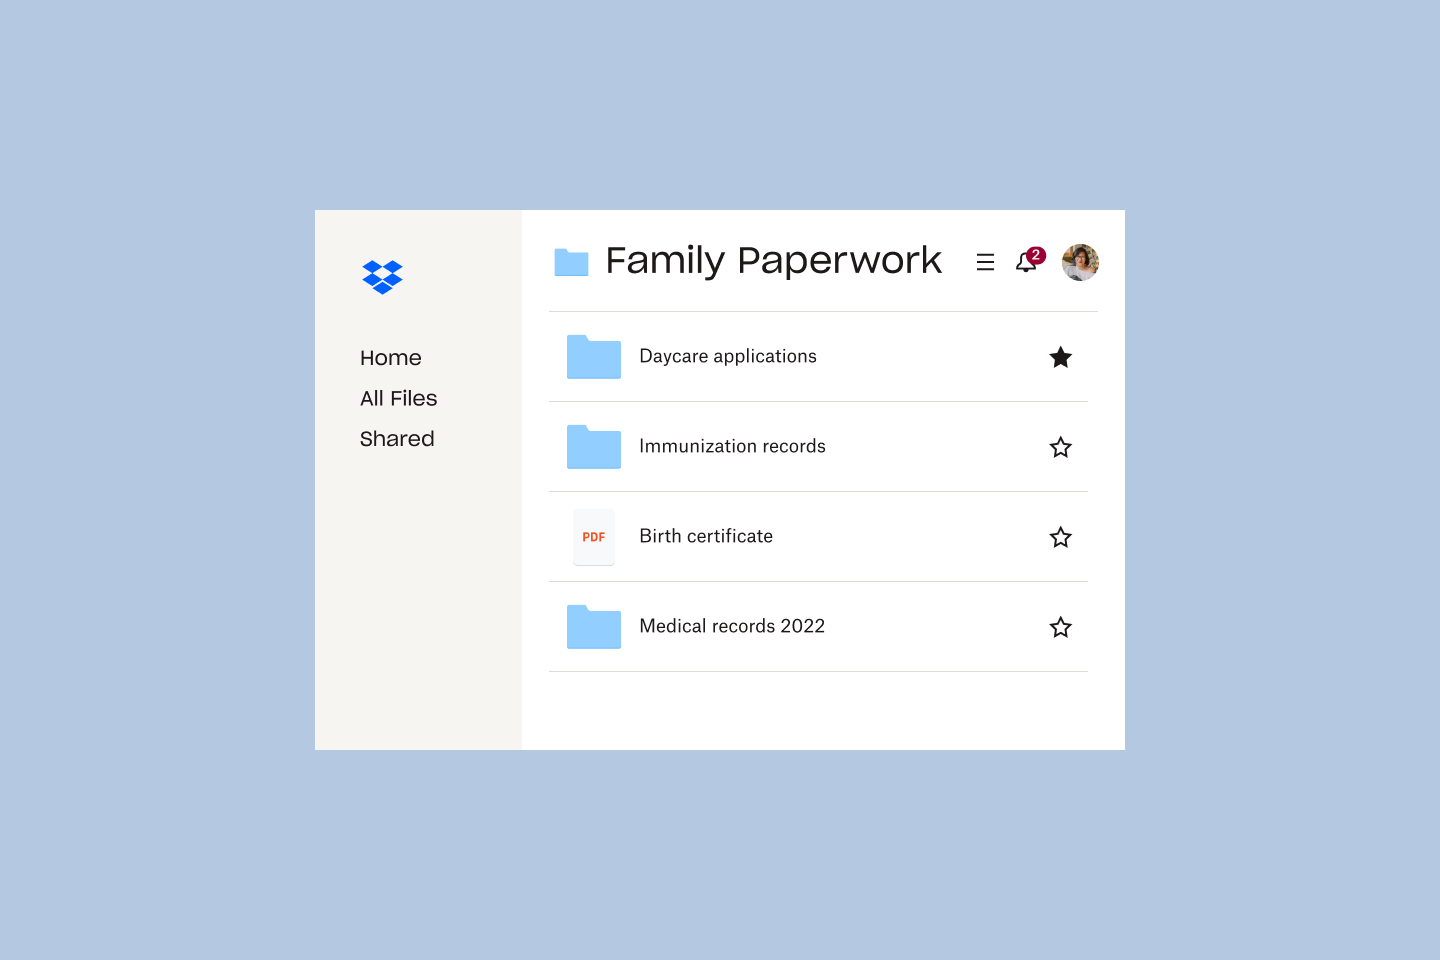 Store back-up copies of important family paperwork in your Dropbox account